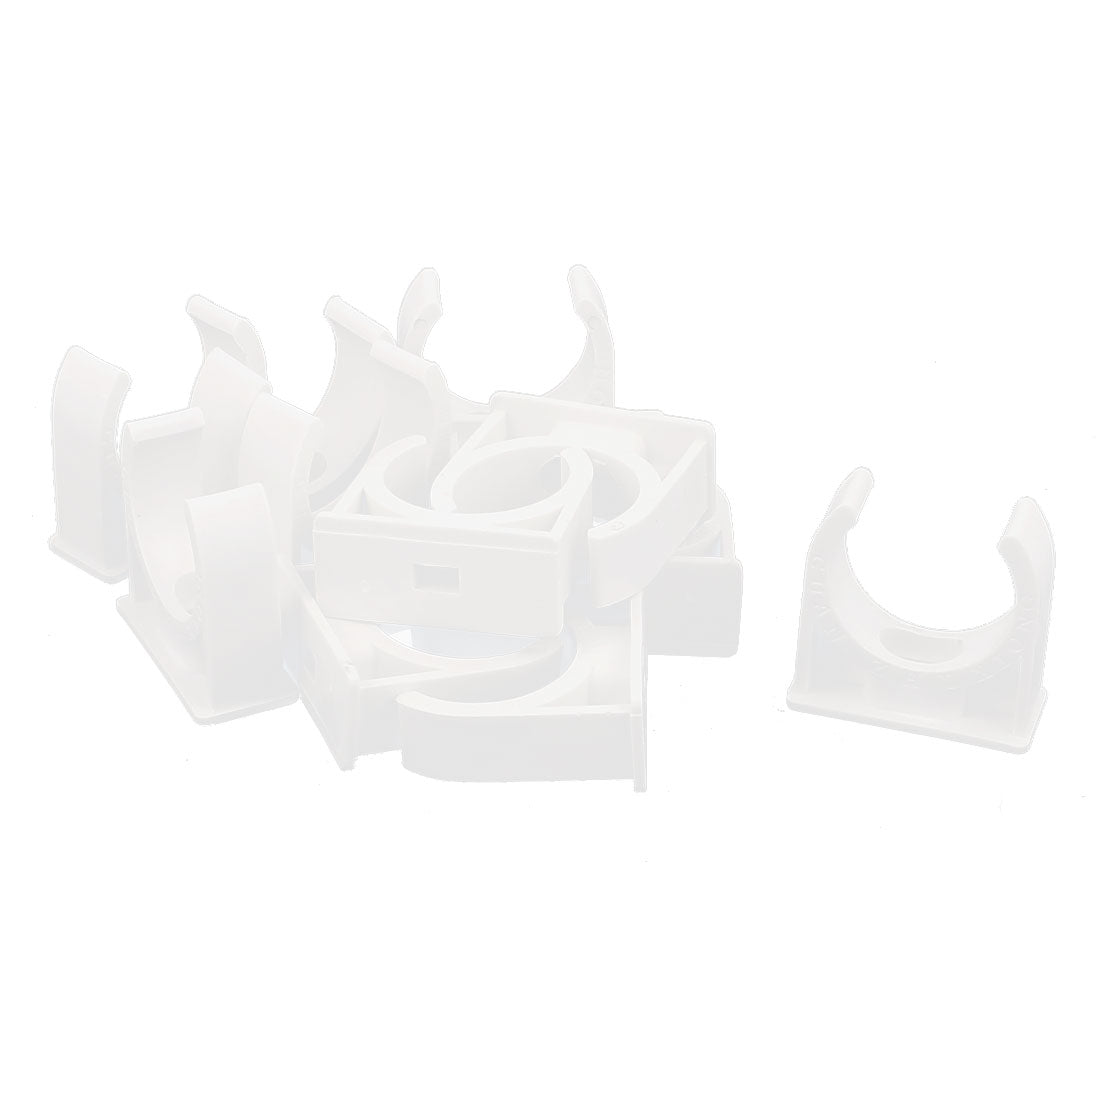 uxcell Uxcell 12 Pcs 30mm Diameter PVC Water Tube Pipe Clamps Clips Connectors White